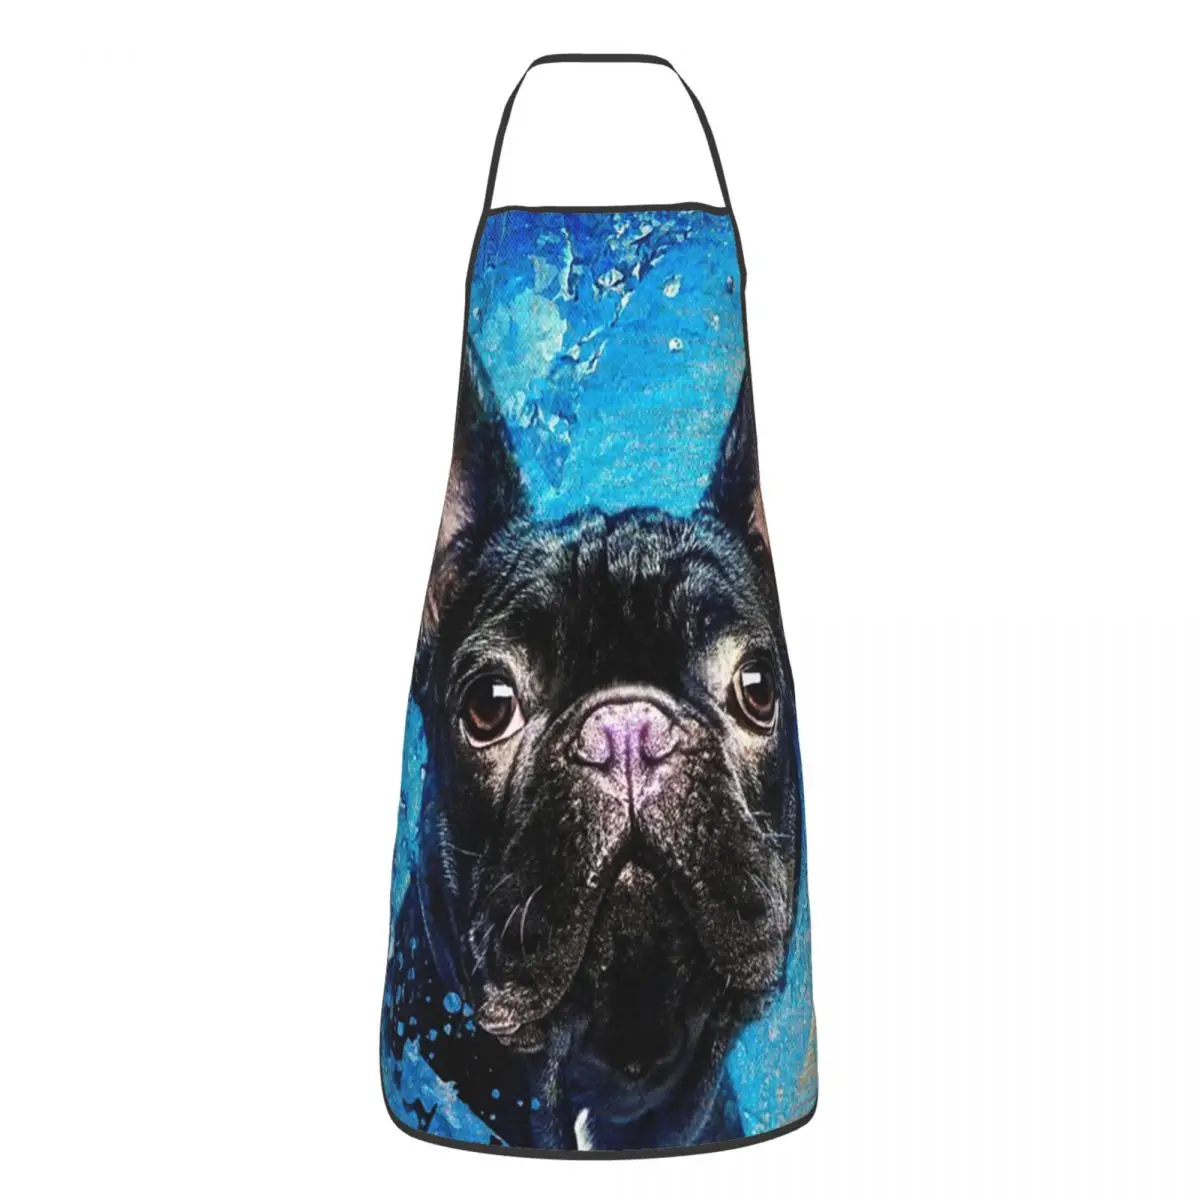 

French Bulldog Frenchie Dog Apron Cuisine Cooking Baking Household Cleaning Gardening Pet Bibs Kitchen Waterproof Pinafore Chef